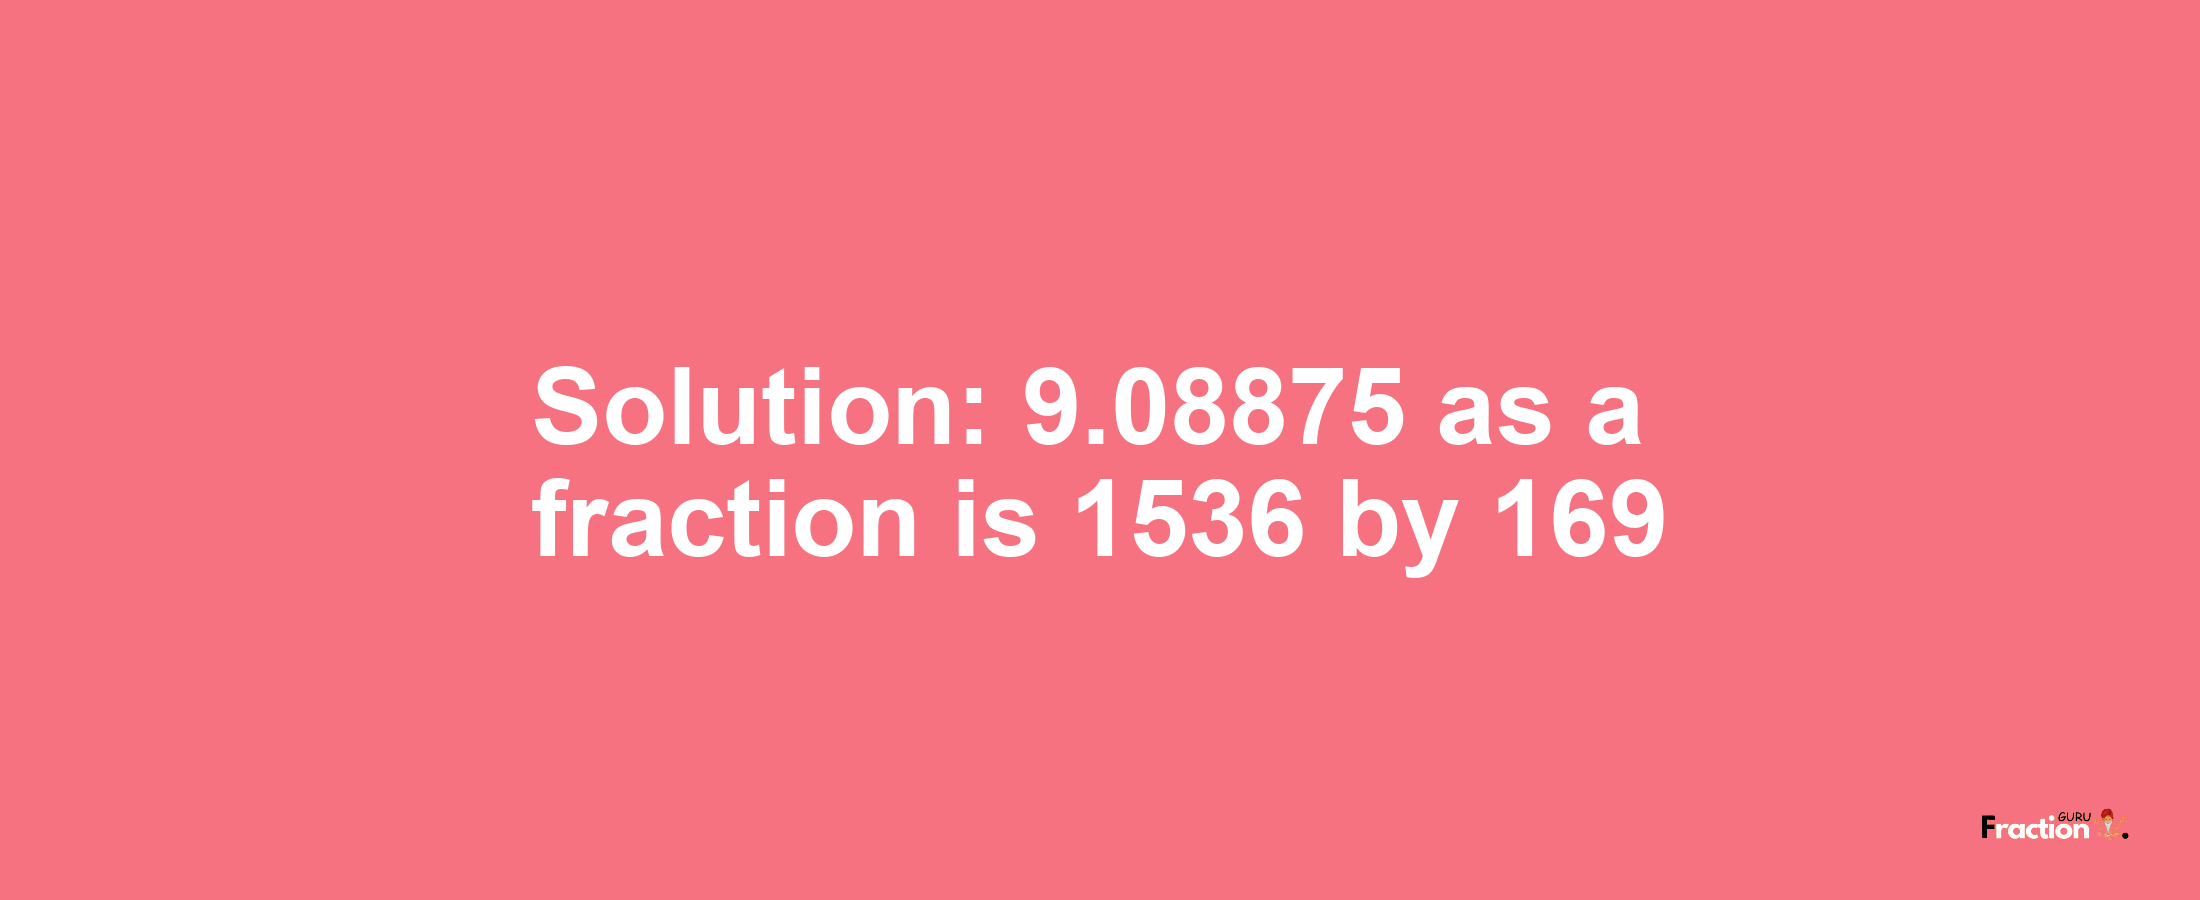 Solution:9.08875 as a fraction is 1536/169